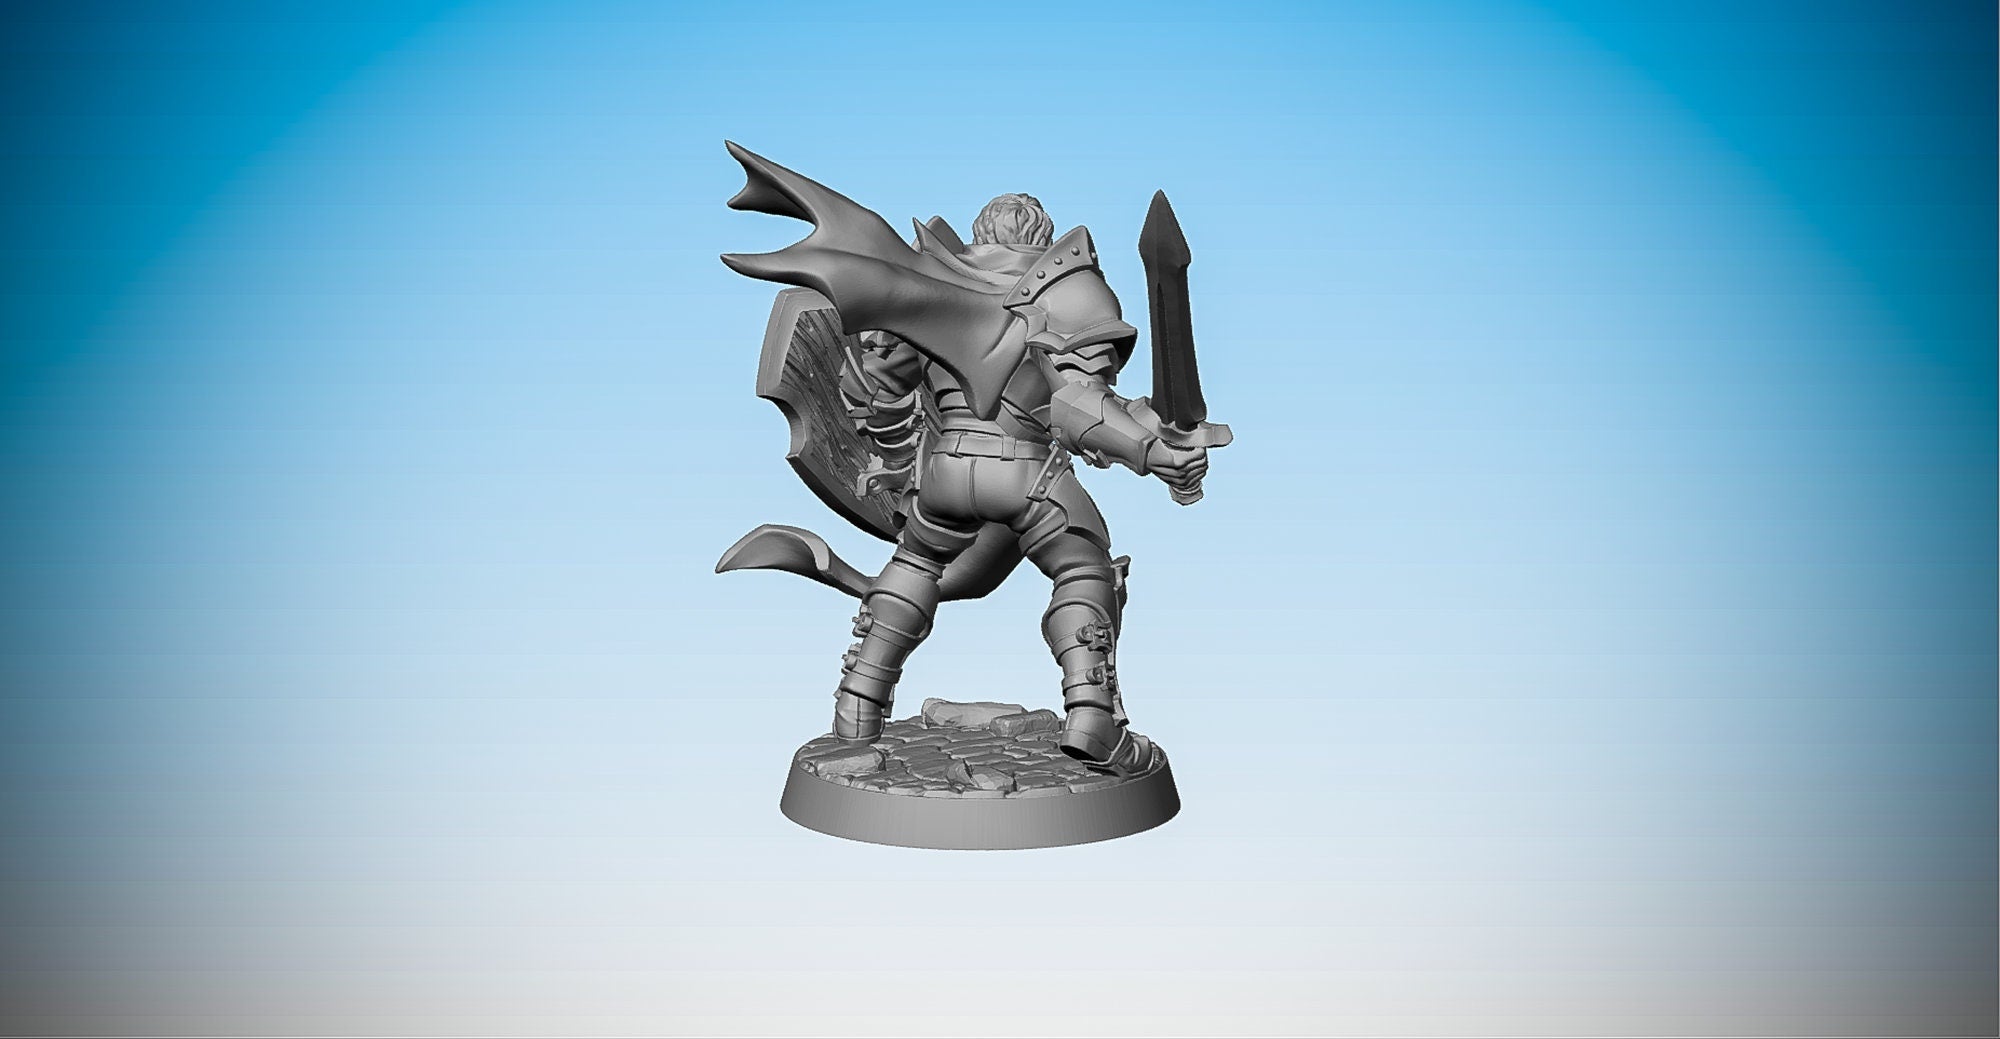 HUMAN WARRIOR "Sword & Shield" | Dungeons and Dragons | DnD | Pathfinder | Tabletop | RPG | Hero Size | 28 mm-Role Playing Miniatures